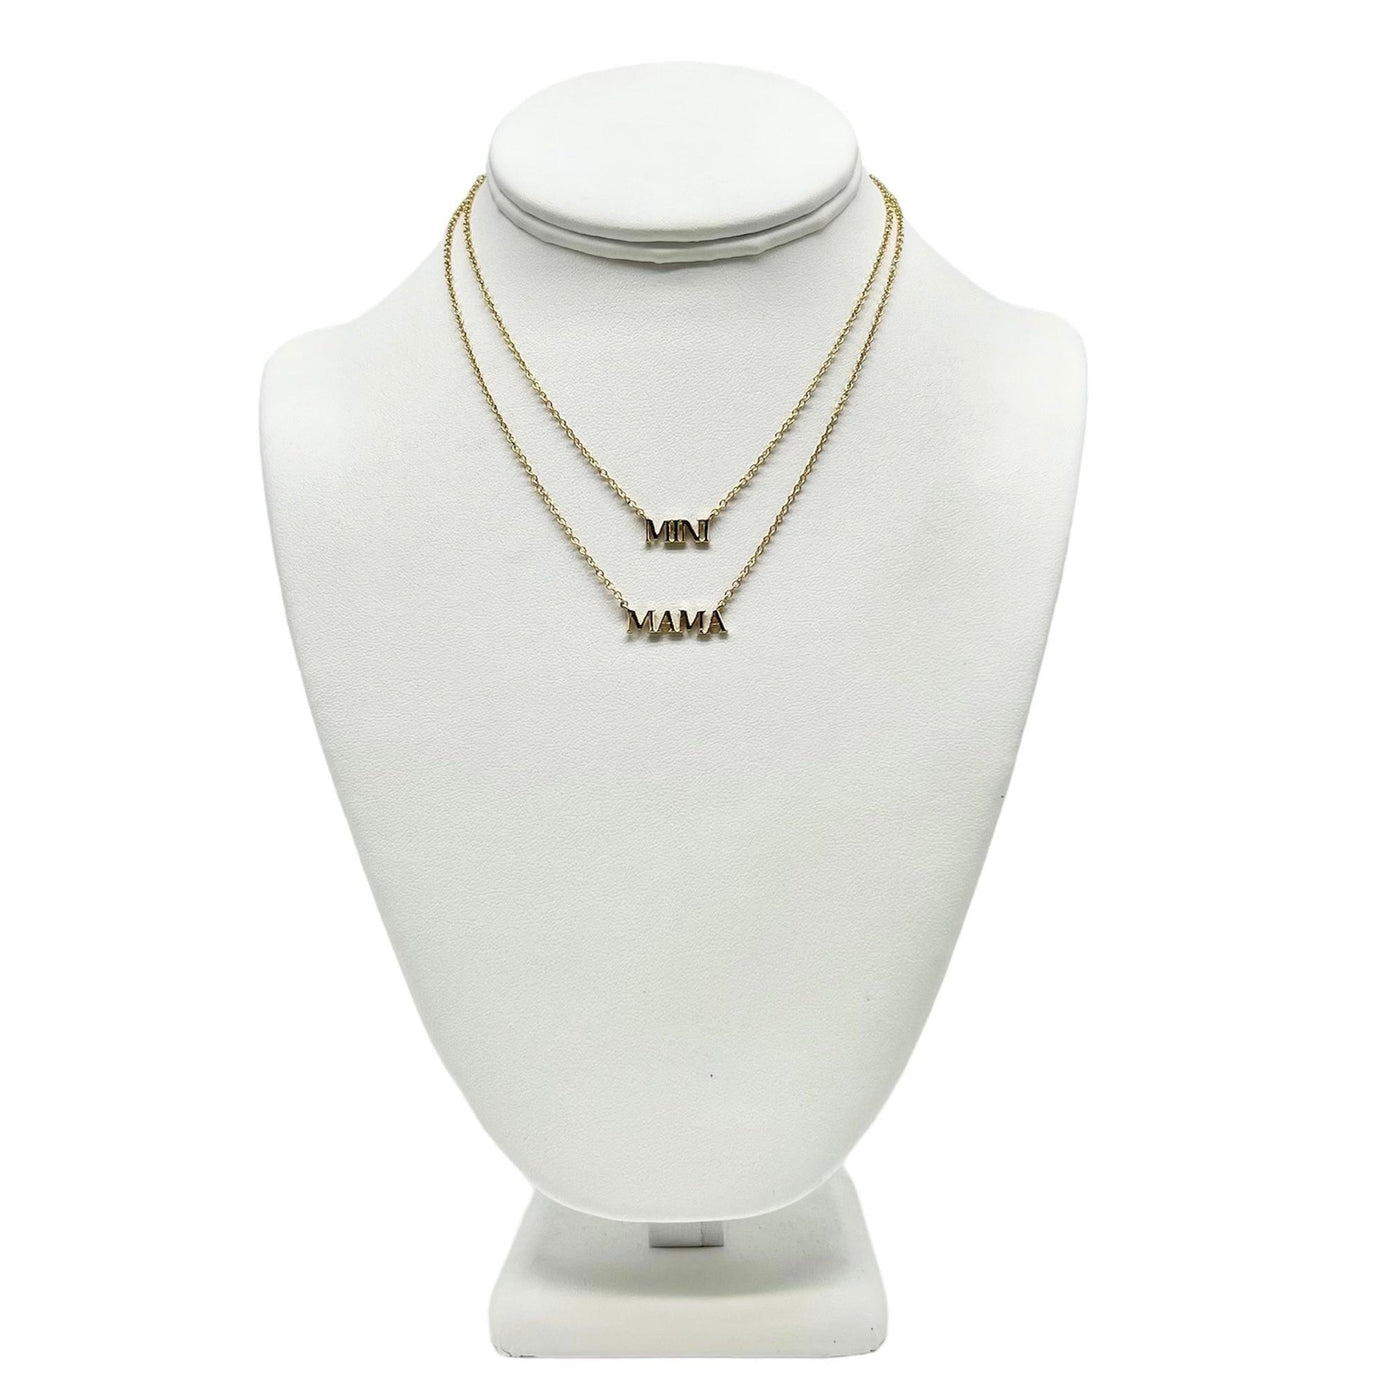 Dainty gold necklaces with "MAMA" and "MInI" pendants